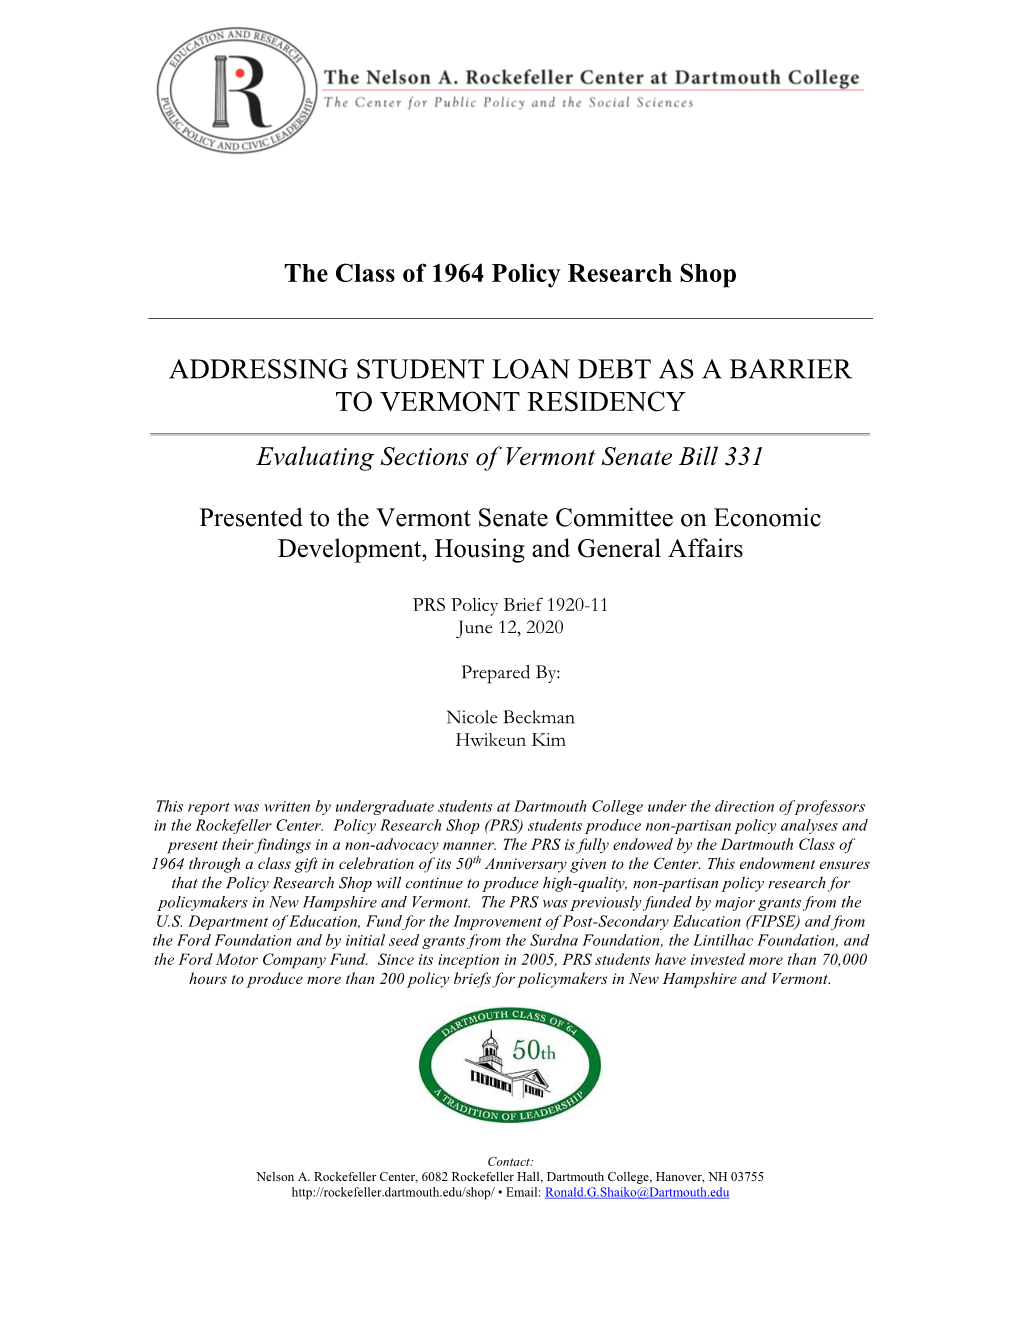 Addressing Student Loan Debt As a Barrier to Vermont Residency